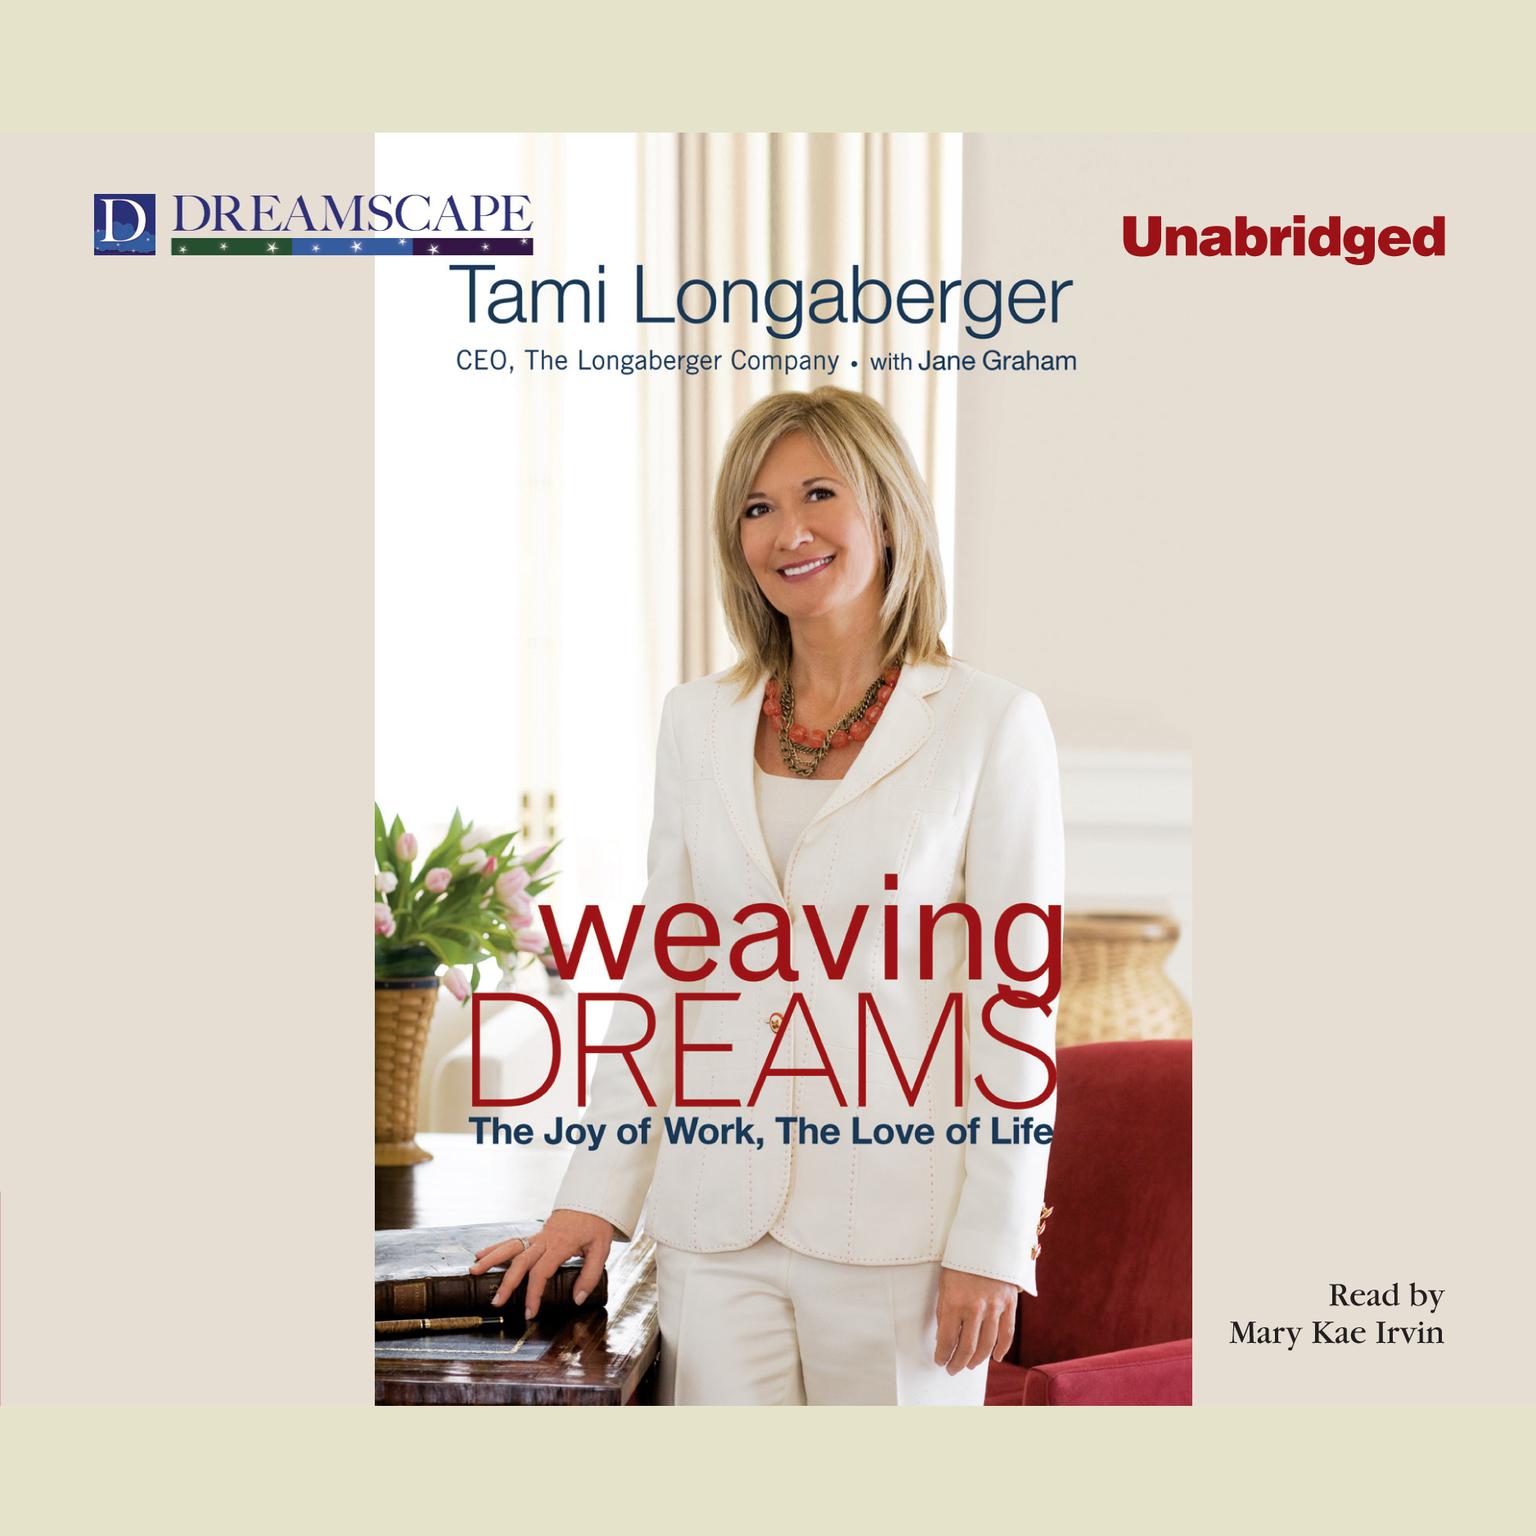 Weaving Dreams: The Joy of Work, The Love of Life Audiobook, by Tami Longaberger